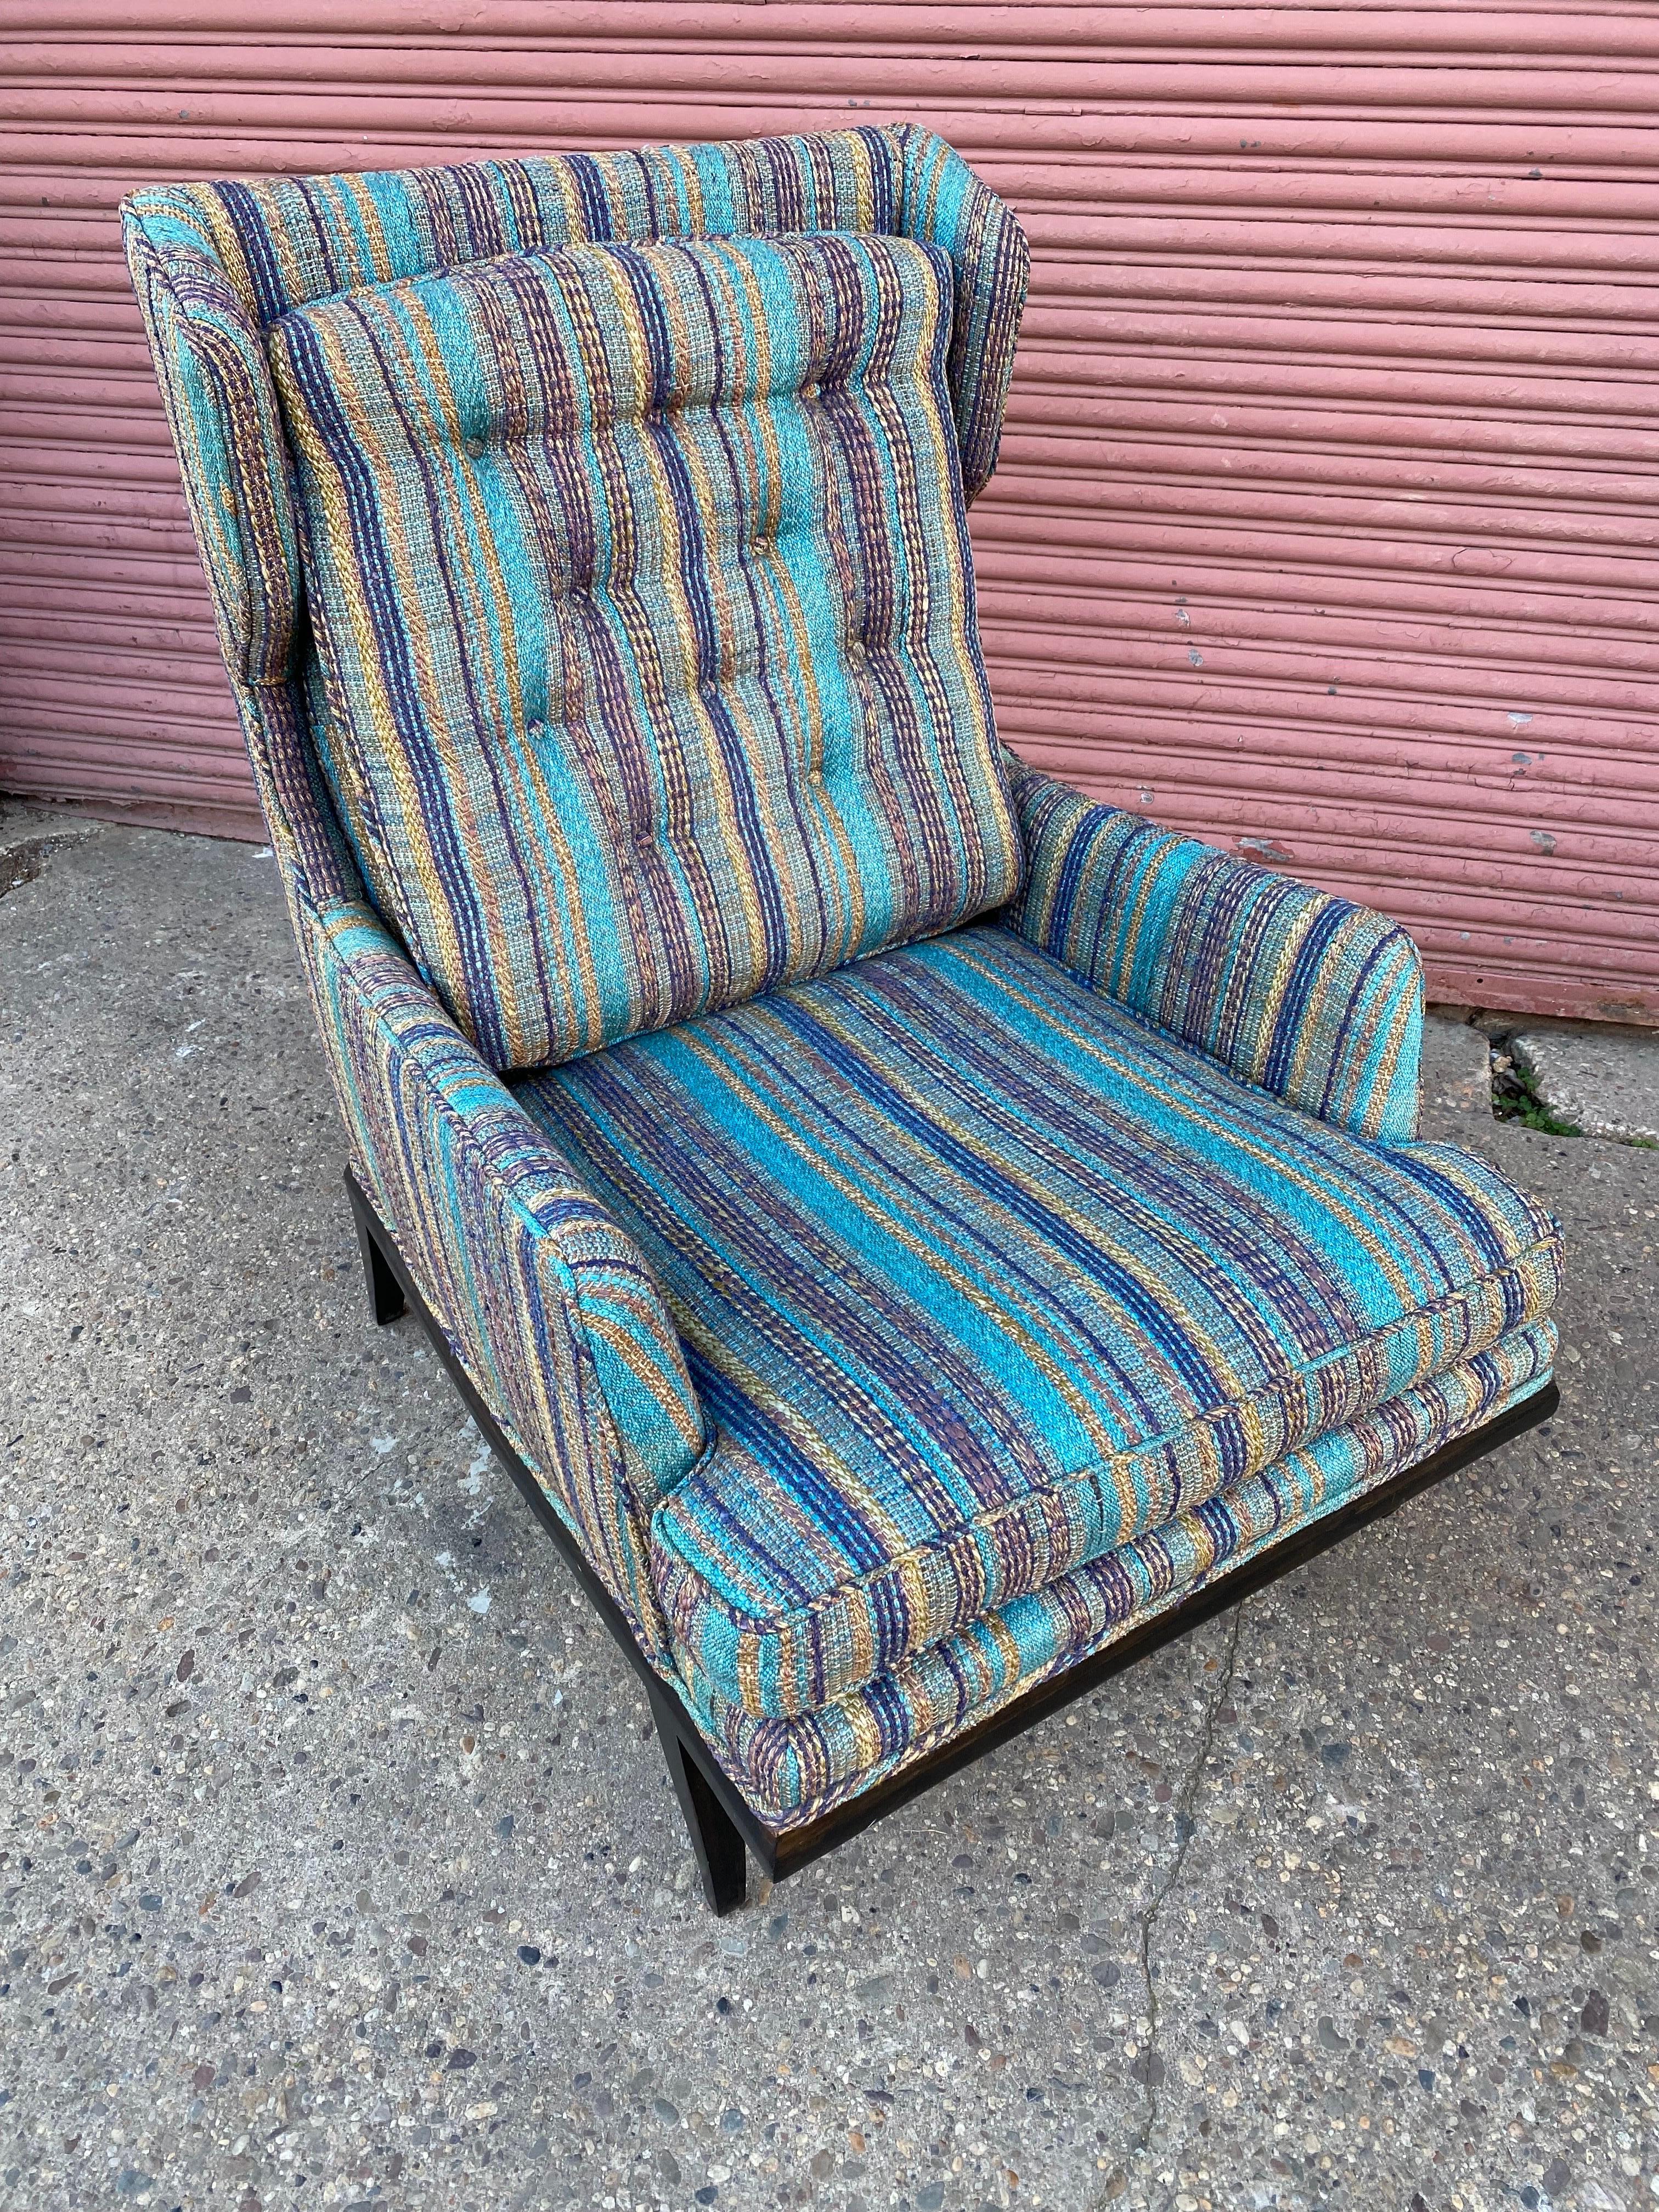 Mid century upholstered Winged lounge chair with original Jack Lenor Larsen fabric in amazing condition! Chair in very nice shape, designer unknown but somewhat like Edward Wormley Designs for Dunbar. Extremely comfortable! Nicer larger scale!